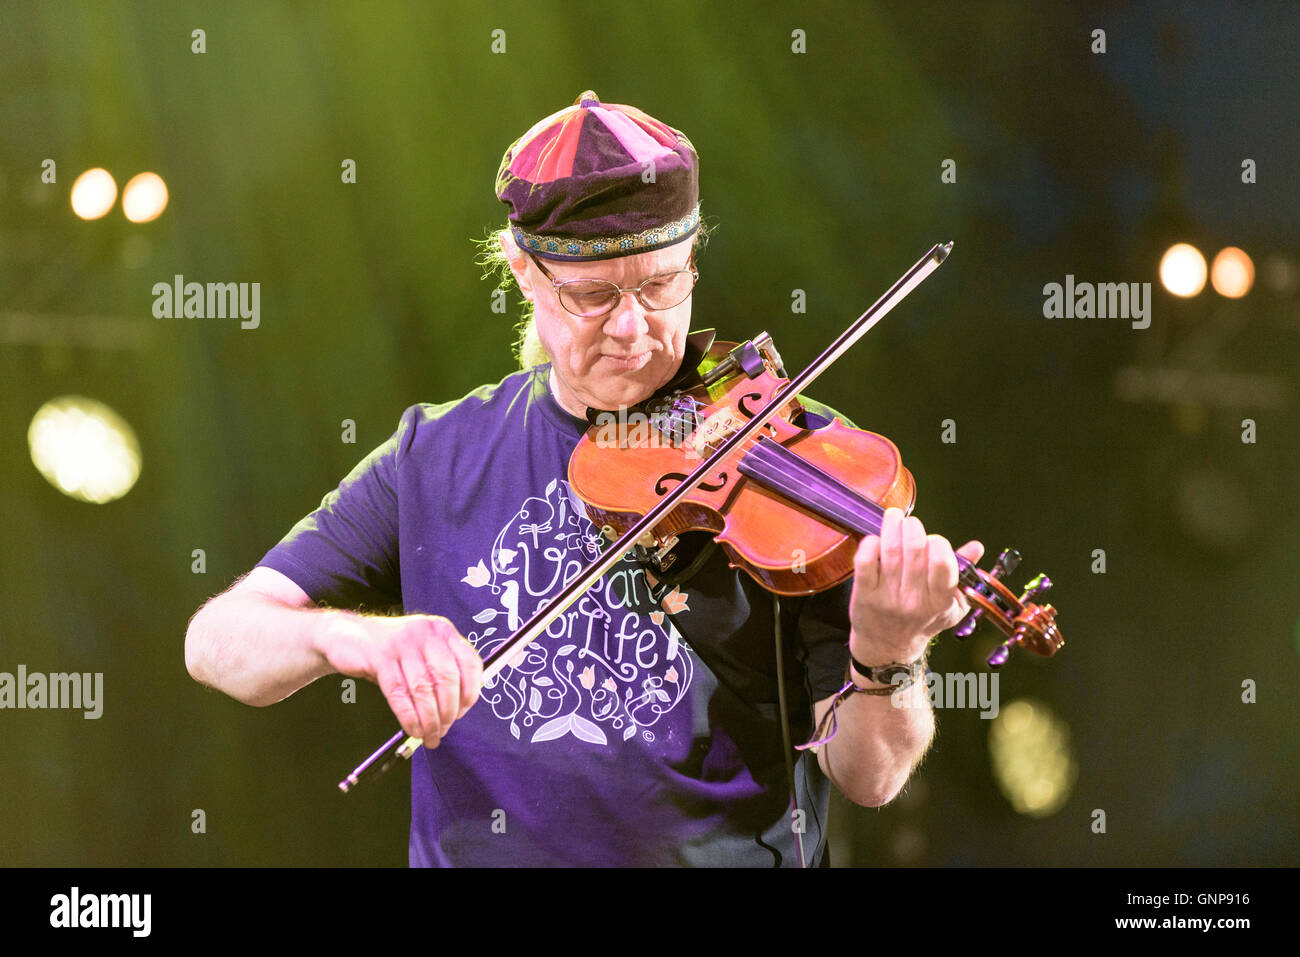 Ric Saunders of Fairport Convention performing at Fairport's Cropredy Convention, Banbury, England, UK. August 11, 2016 Stock Photo